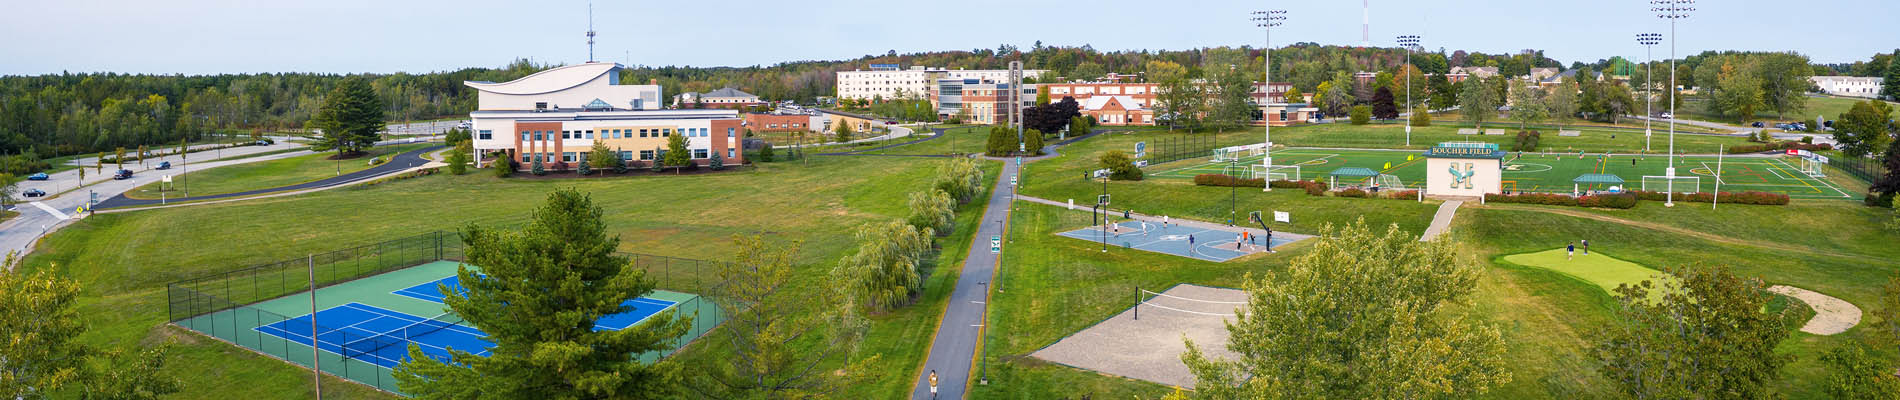 An aerial image of the campus of Husson university